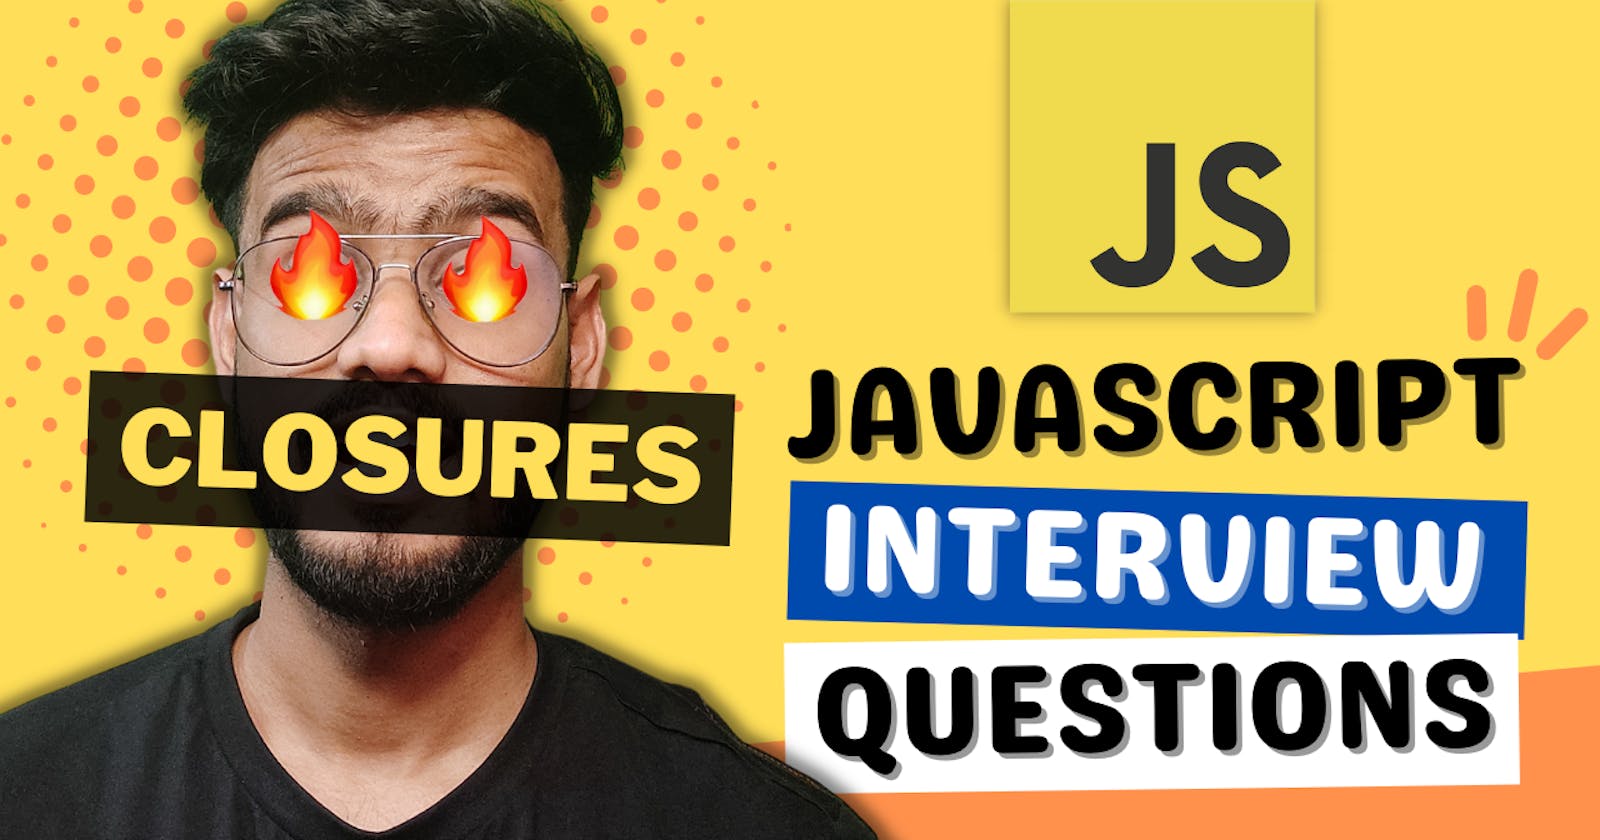 Javascript Interview Questions on Closures - Lexical Scope, Output based Questions, Polyfills and more